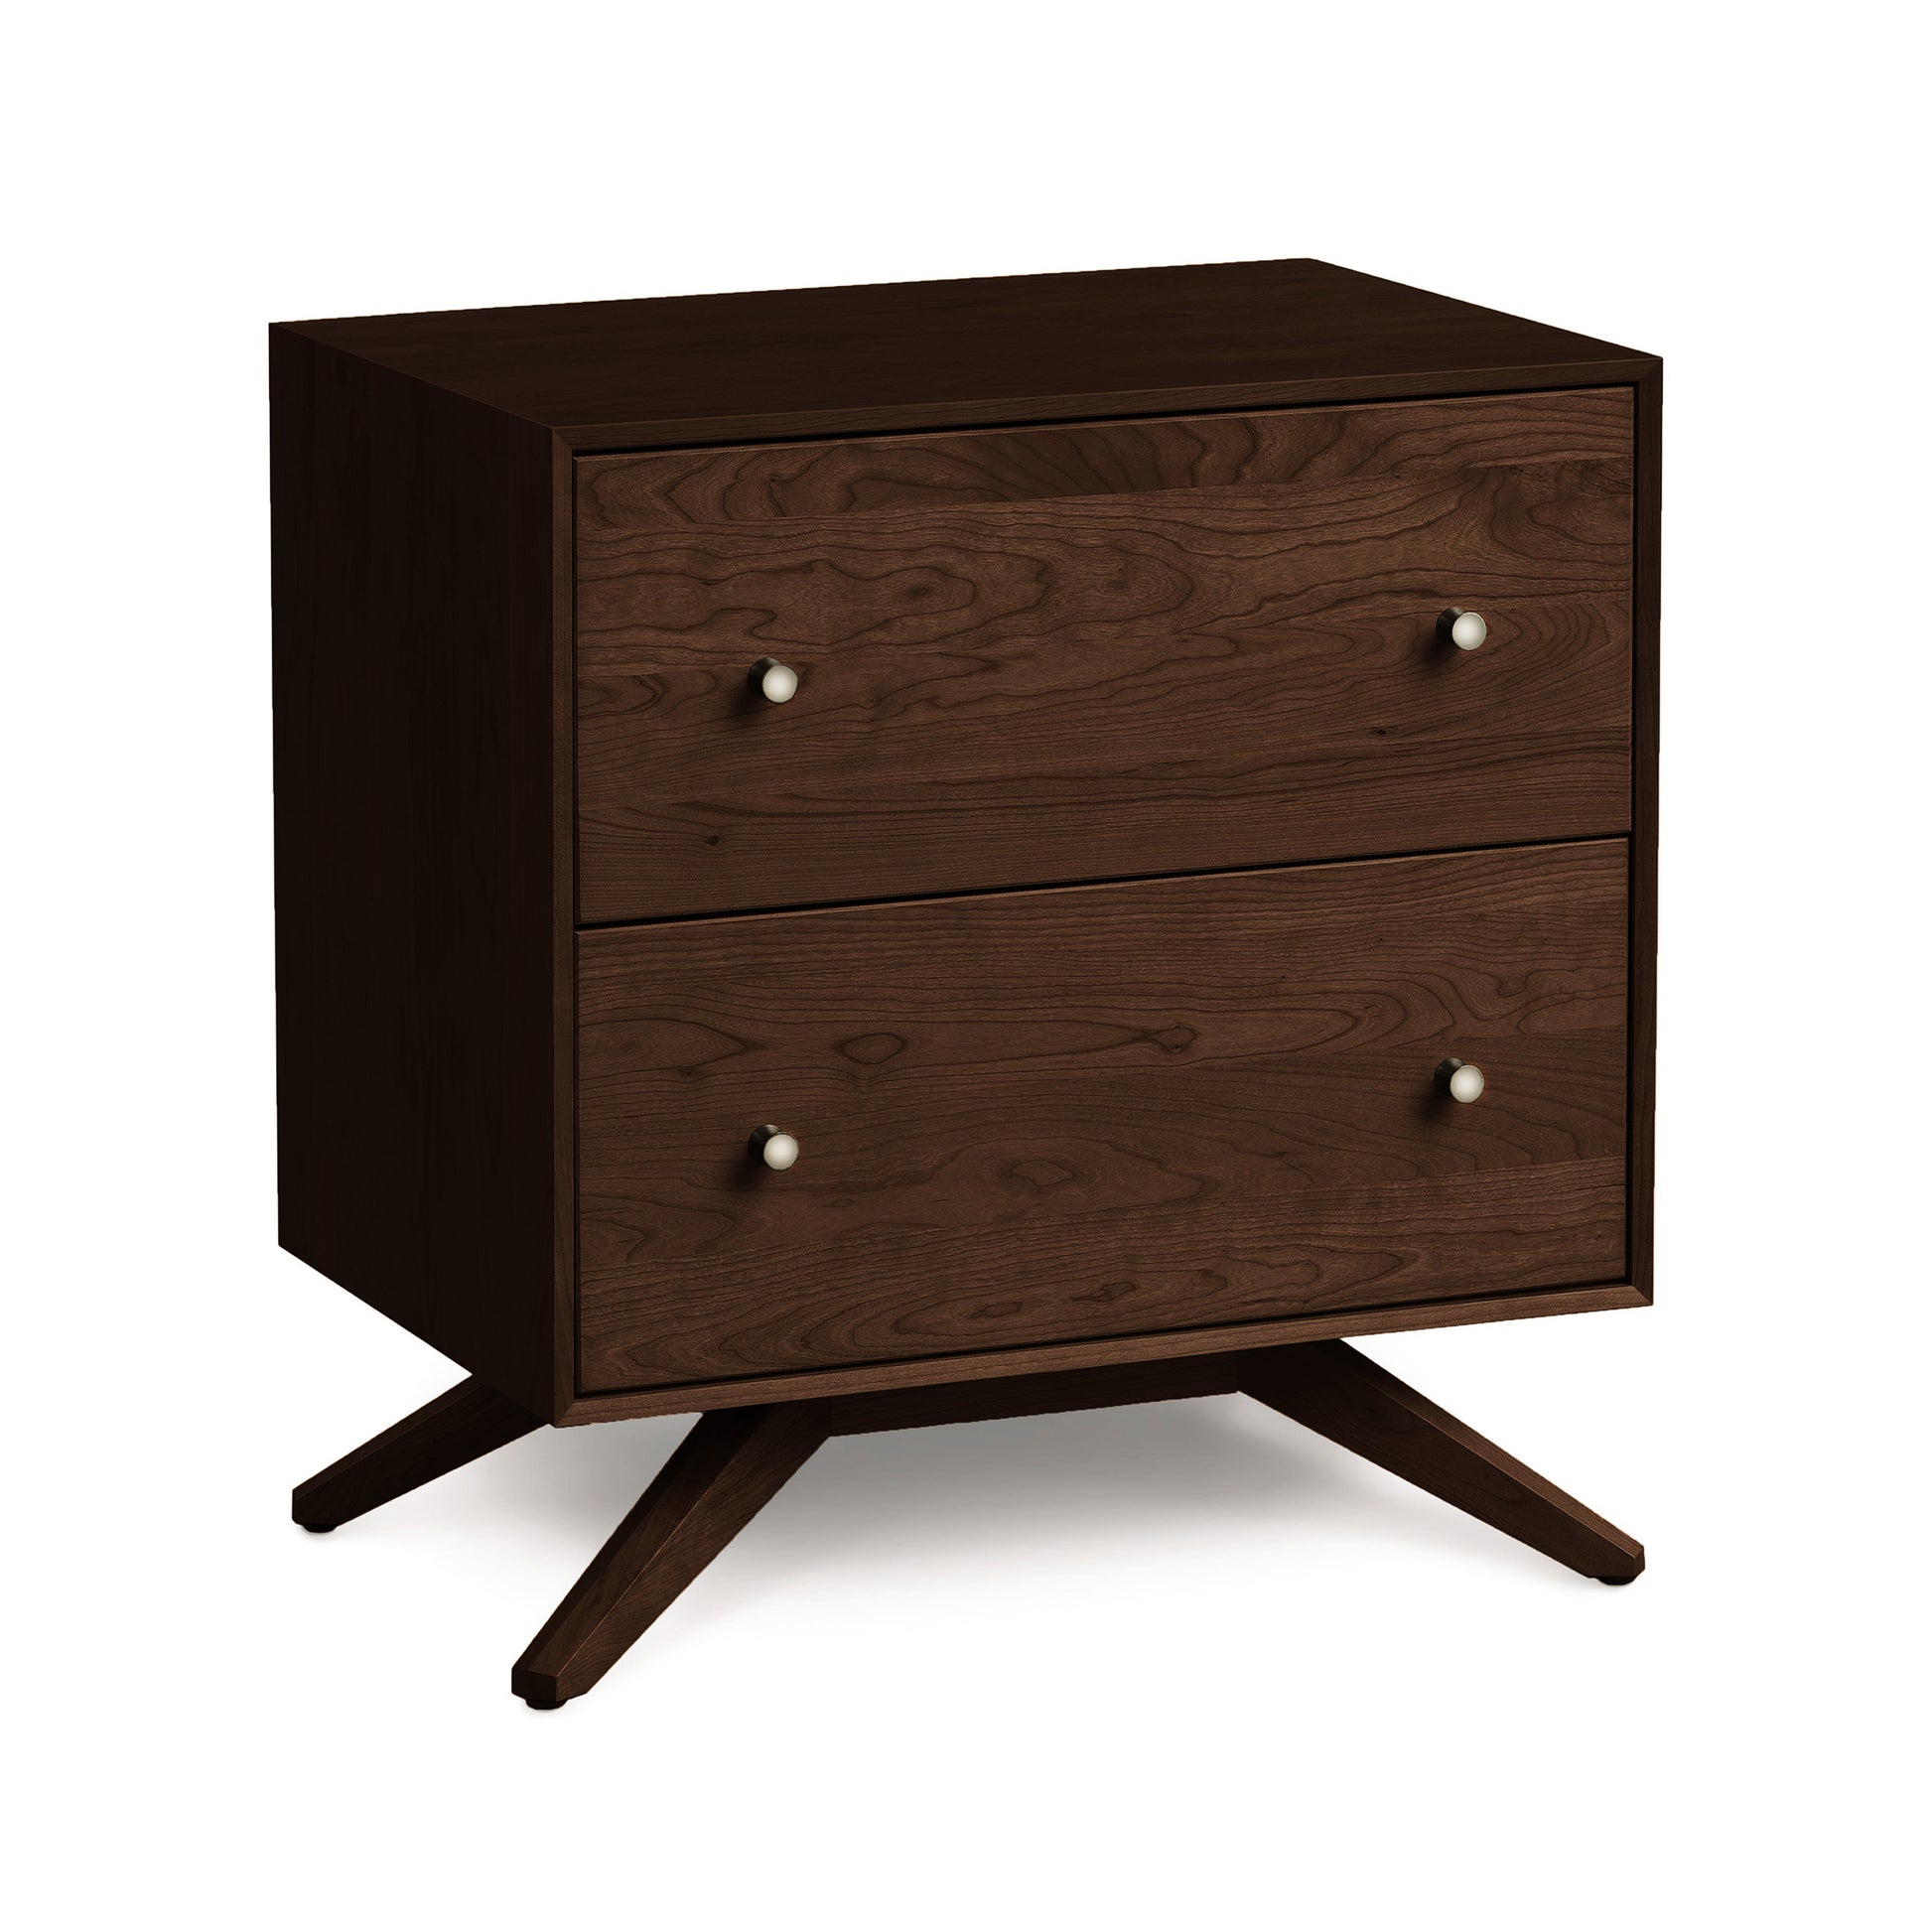 A Copeland Furniture Astrid 2-Drawer Nightstand with splayed legs on a white background.